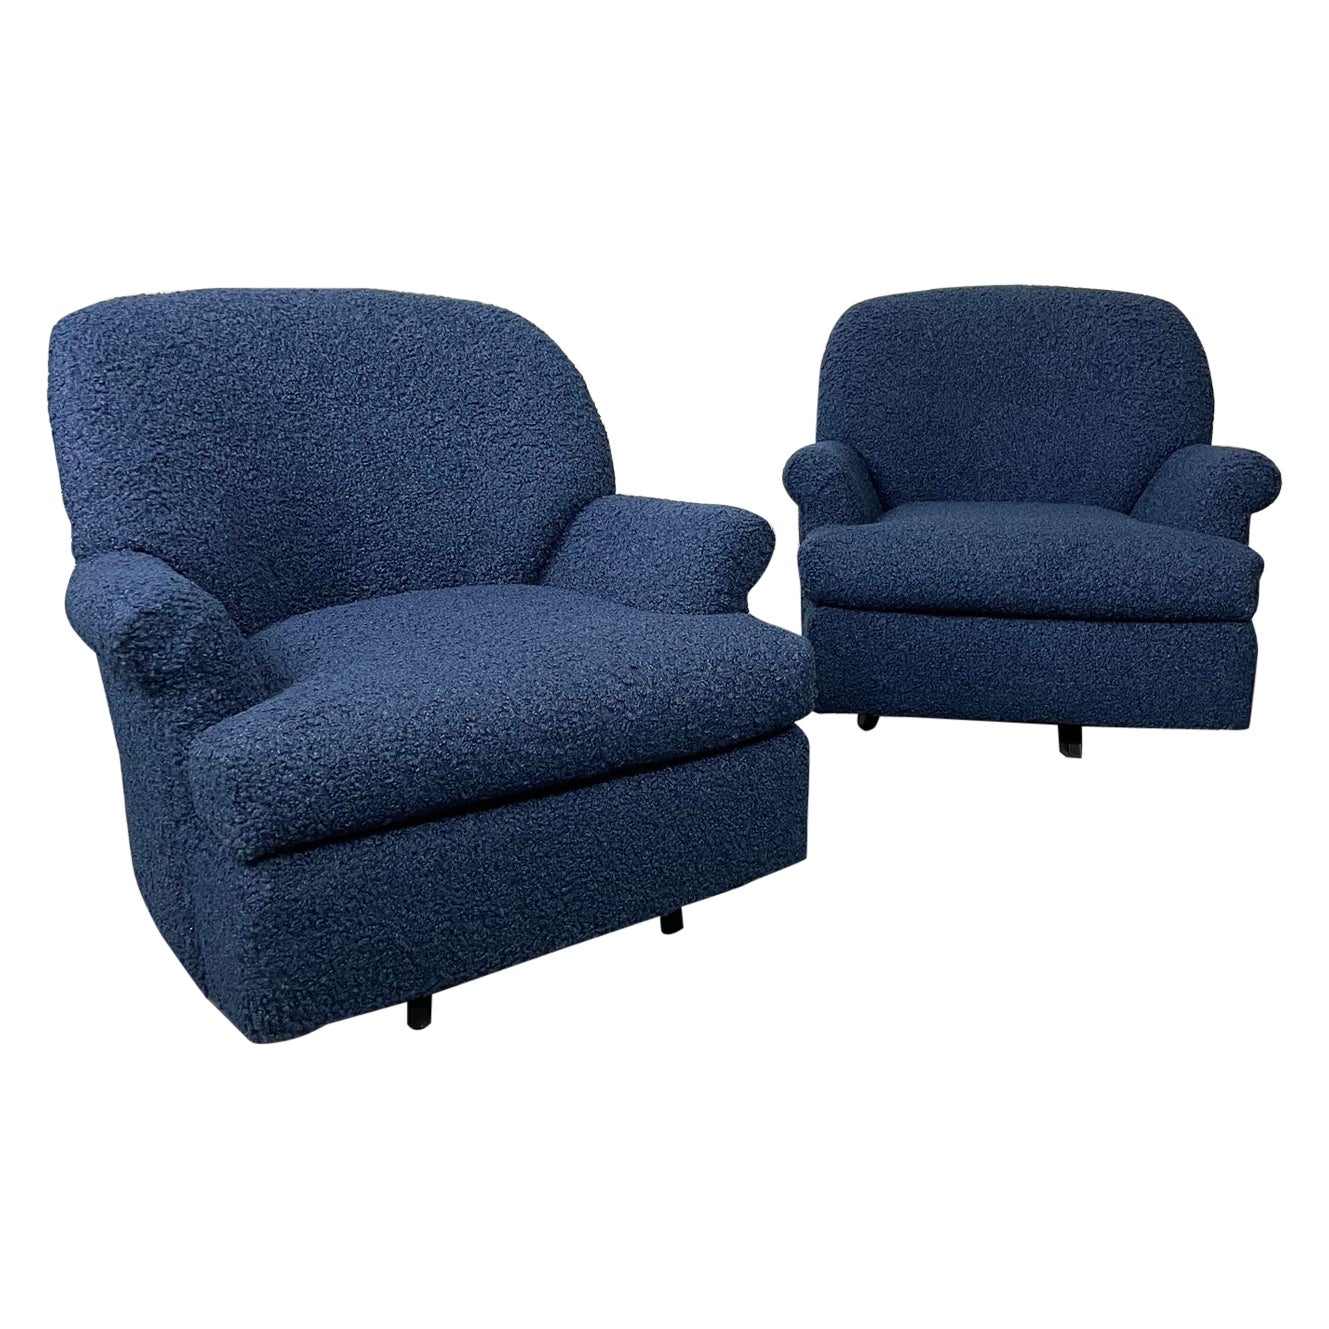 Pair of Mid-Century Modern Scroll Arm Swivel Lounge / Arm Chairs, Faux Shearling For Sale